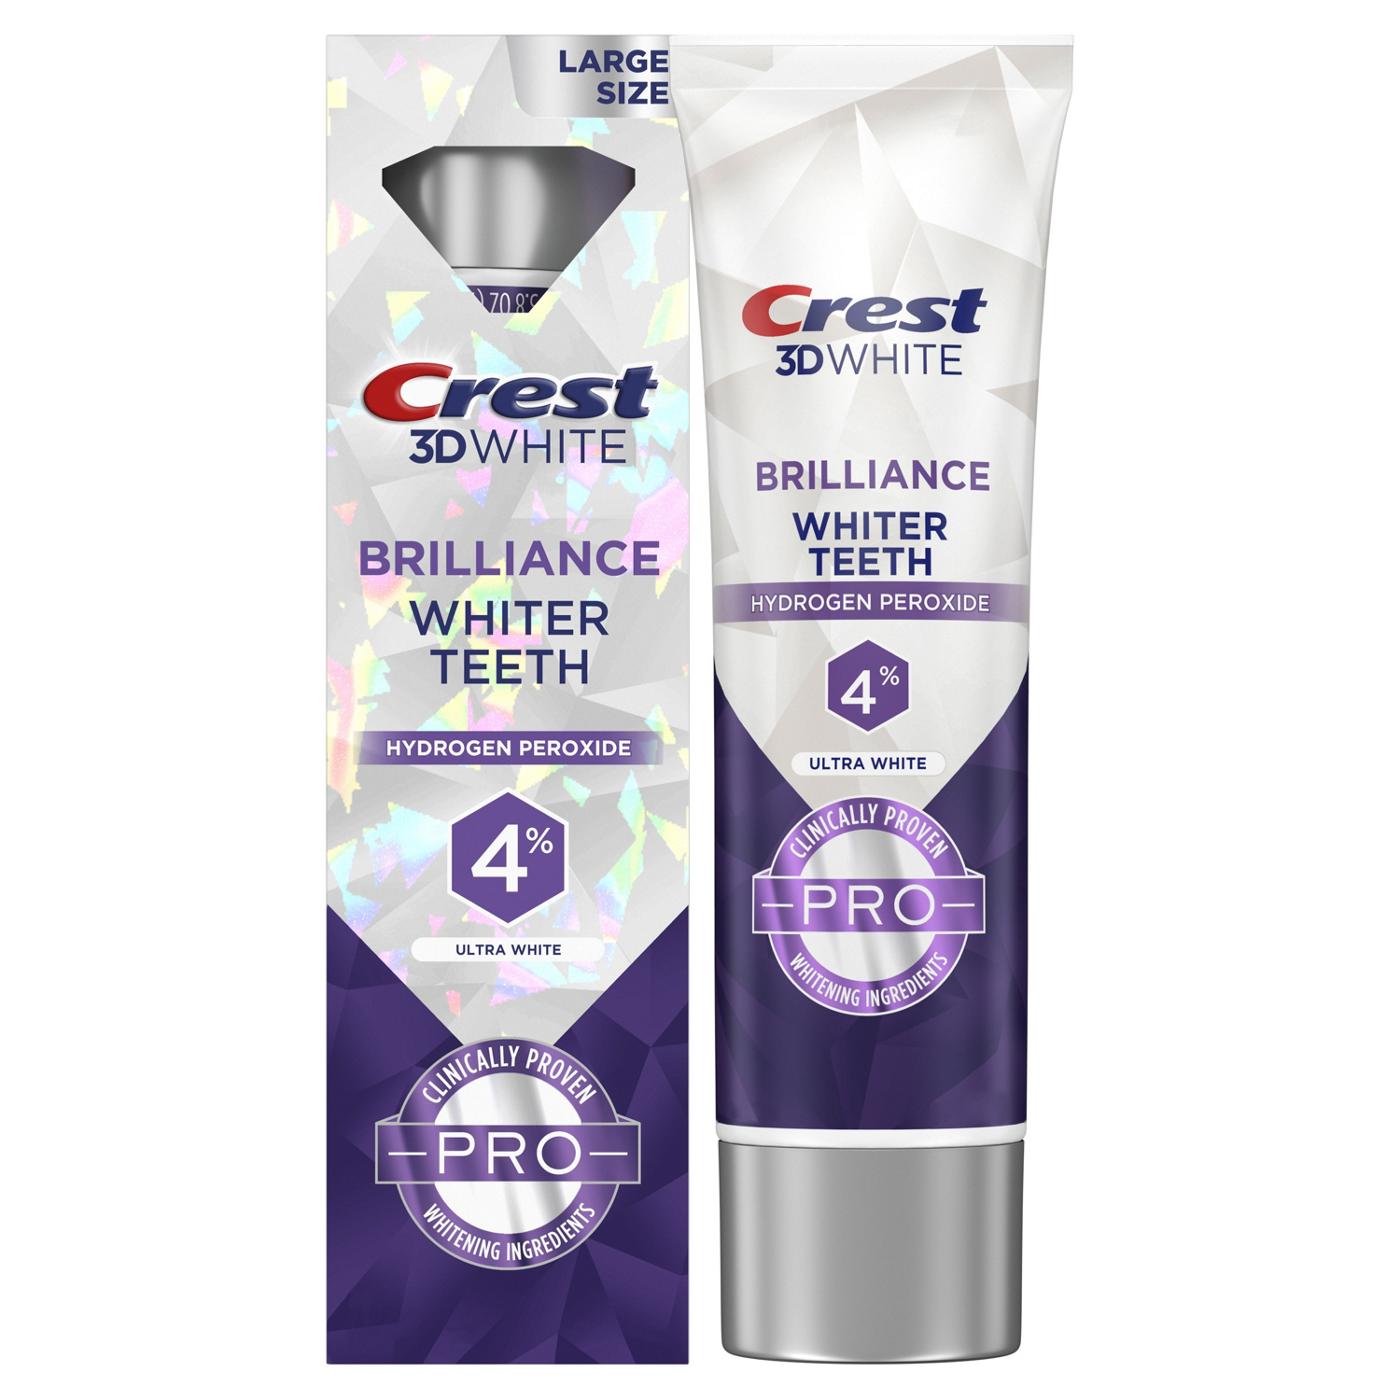 Crest 3D White Brilliance Toothpaste - Ultra White; image 5 of 7